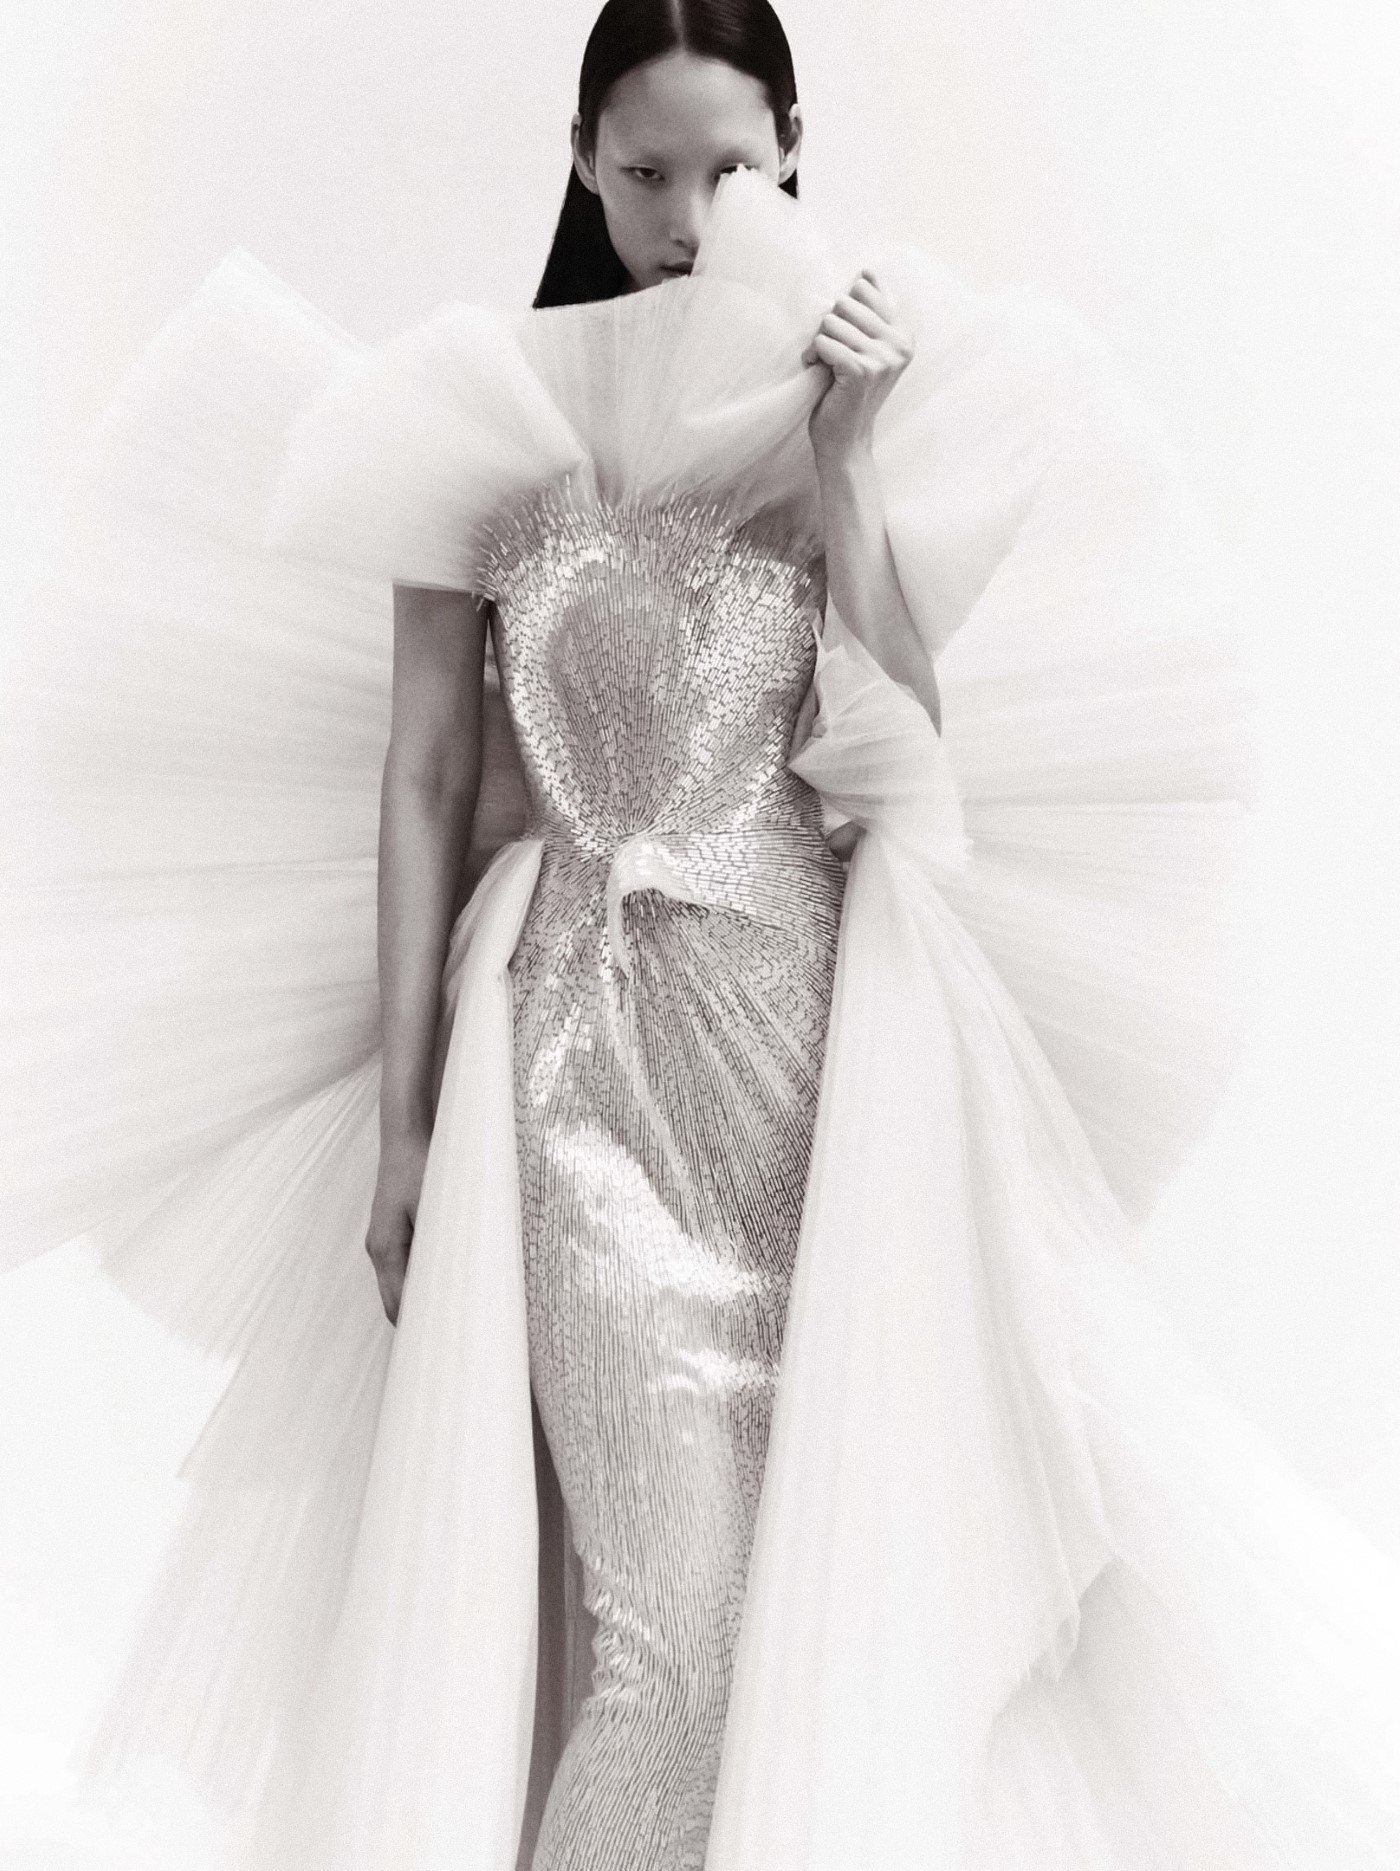 Yoonmi Sun Poses in 'Extravaganza Couture' for Vogue Korea — Anne of ...